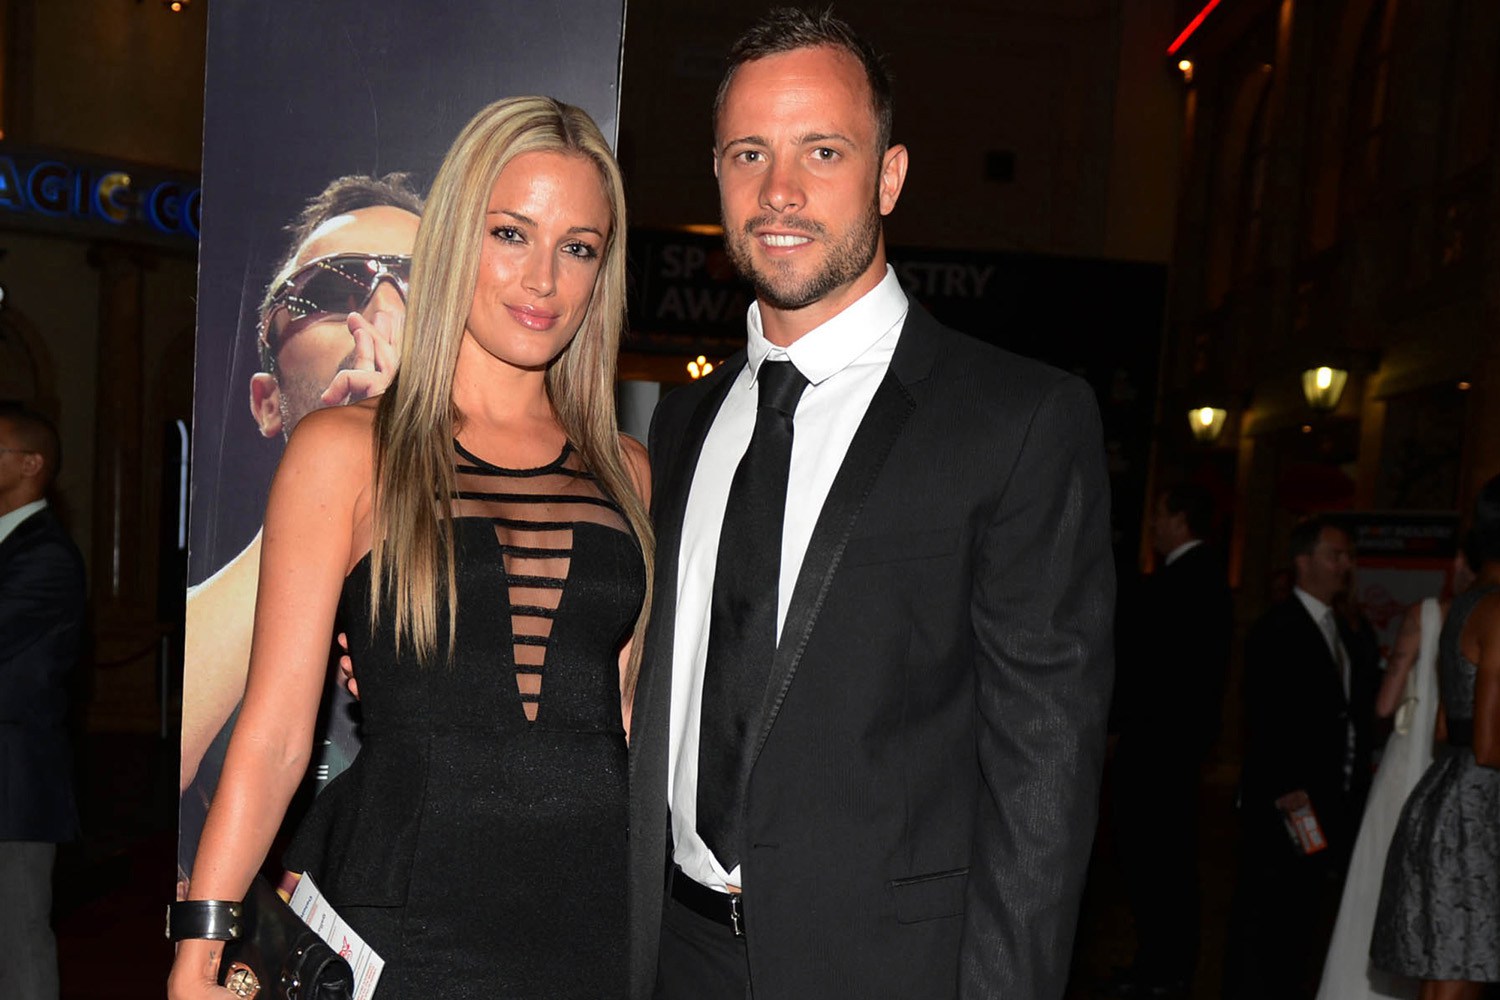 Oscar Pistorius (R) and his girlfriend Reeva Steenkamp pose for a picture in Johannesburg, February 7, 2013. South African "Blade Runner" Oscar Pistorius, a double amputee who became one of the biggest names in world athletics, was charged on February 14, with shooting dead his girlfriend at his home in Pretoria. Picture taken February 7, 2013. REUTERS/Thembani Makhubele (SOUTH AFRICA - Tags: CRIME LAW SPORT ATHLETICS TPX IMAGES OF THE DAY) - RTR3DS4U